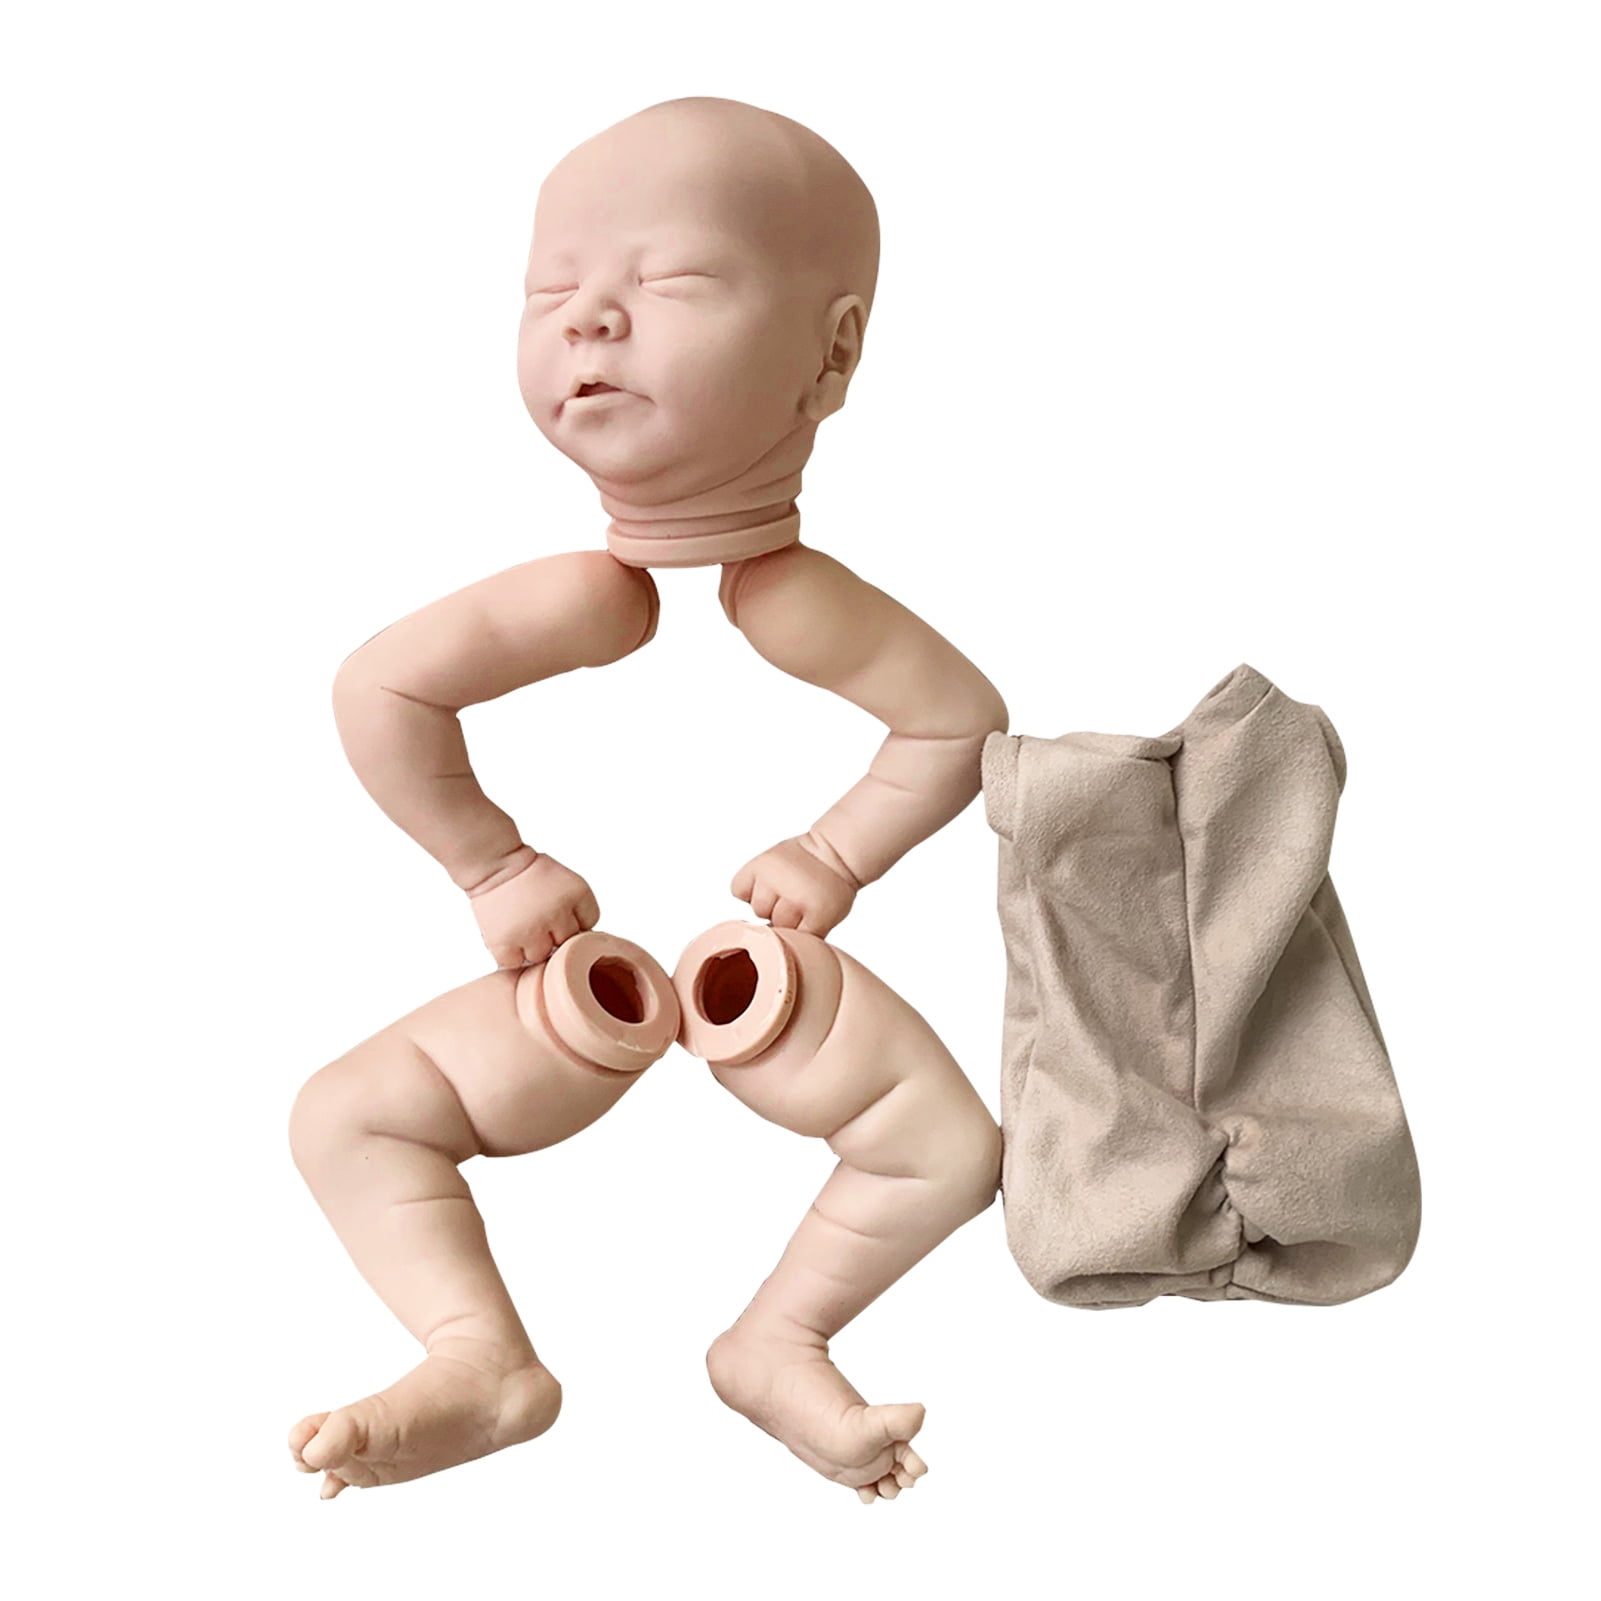 Frankie made of soft vinyl make your own baby w/ FREE GIFT Reborn kit